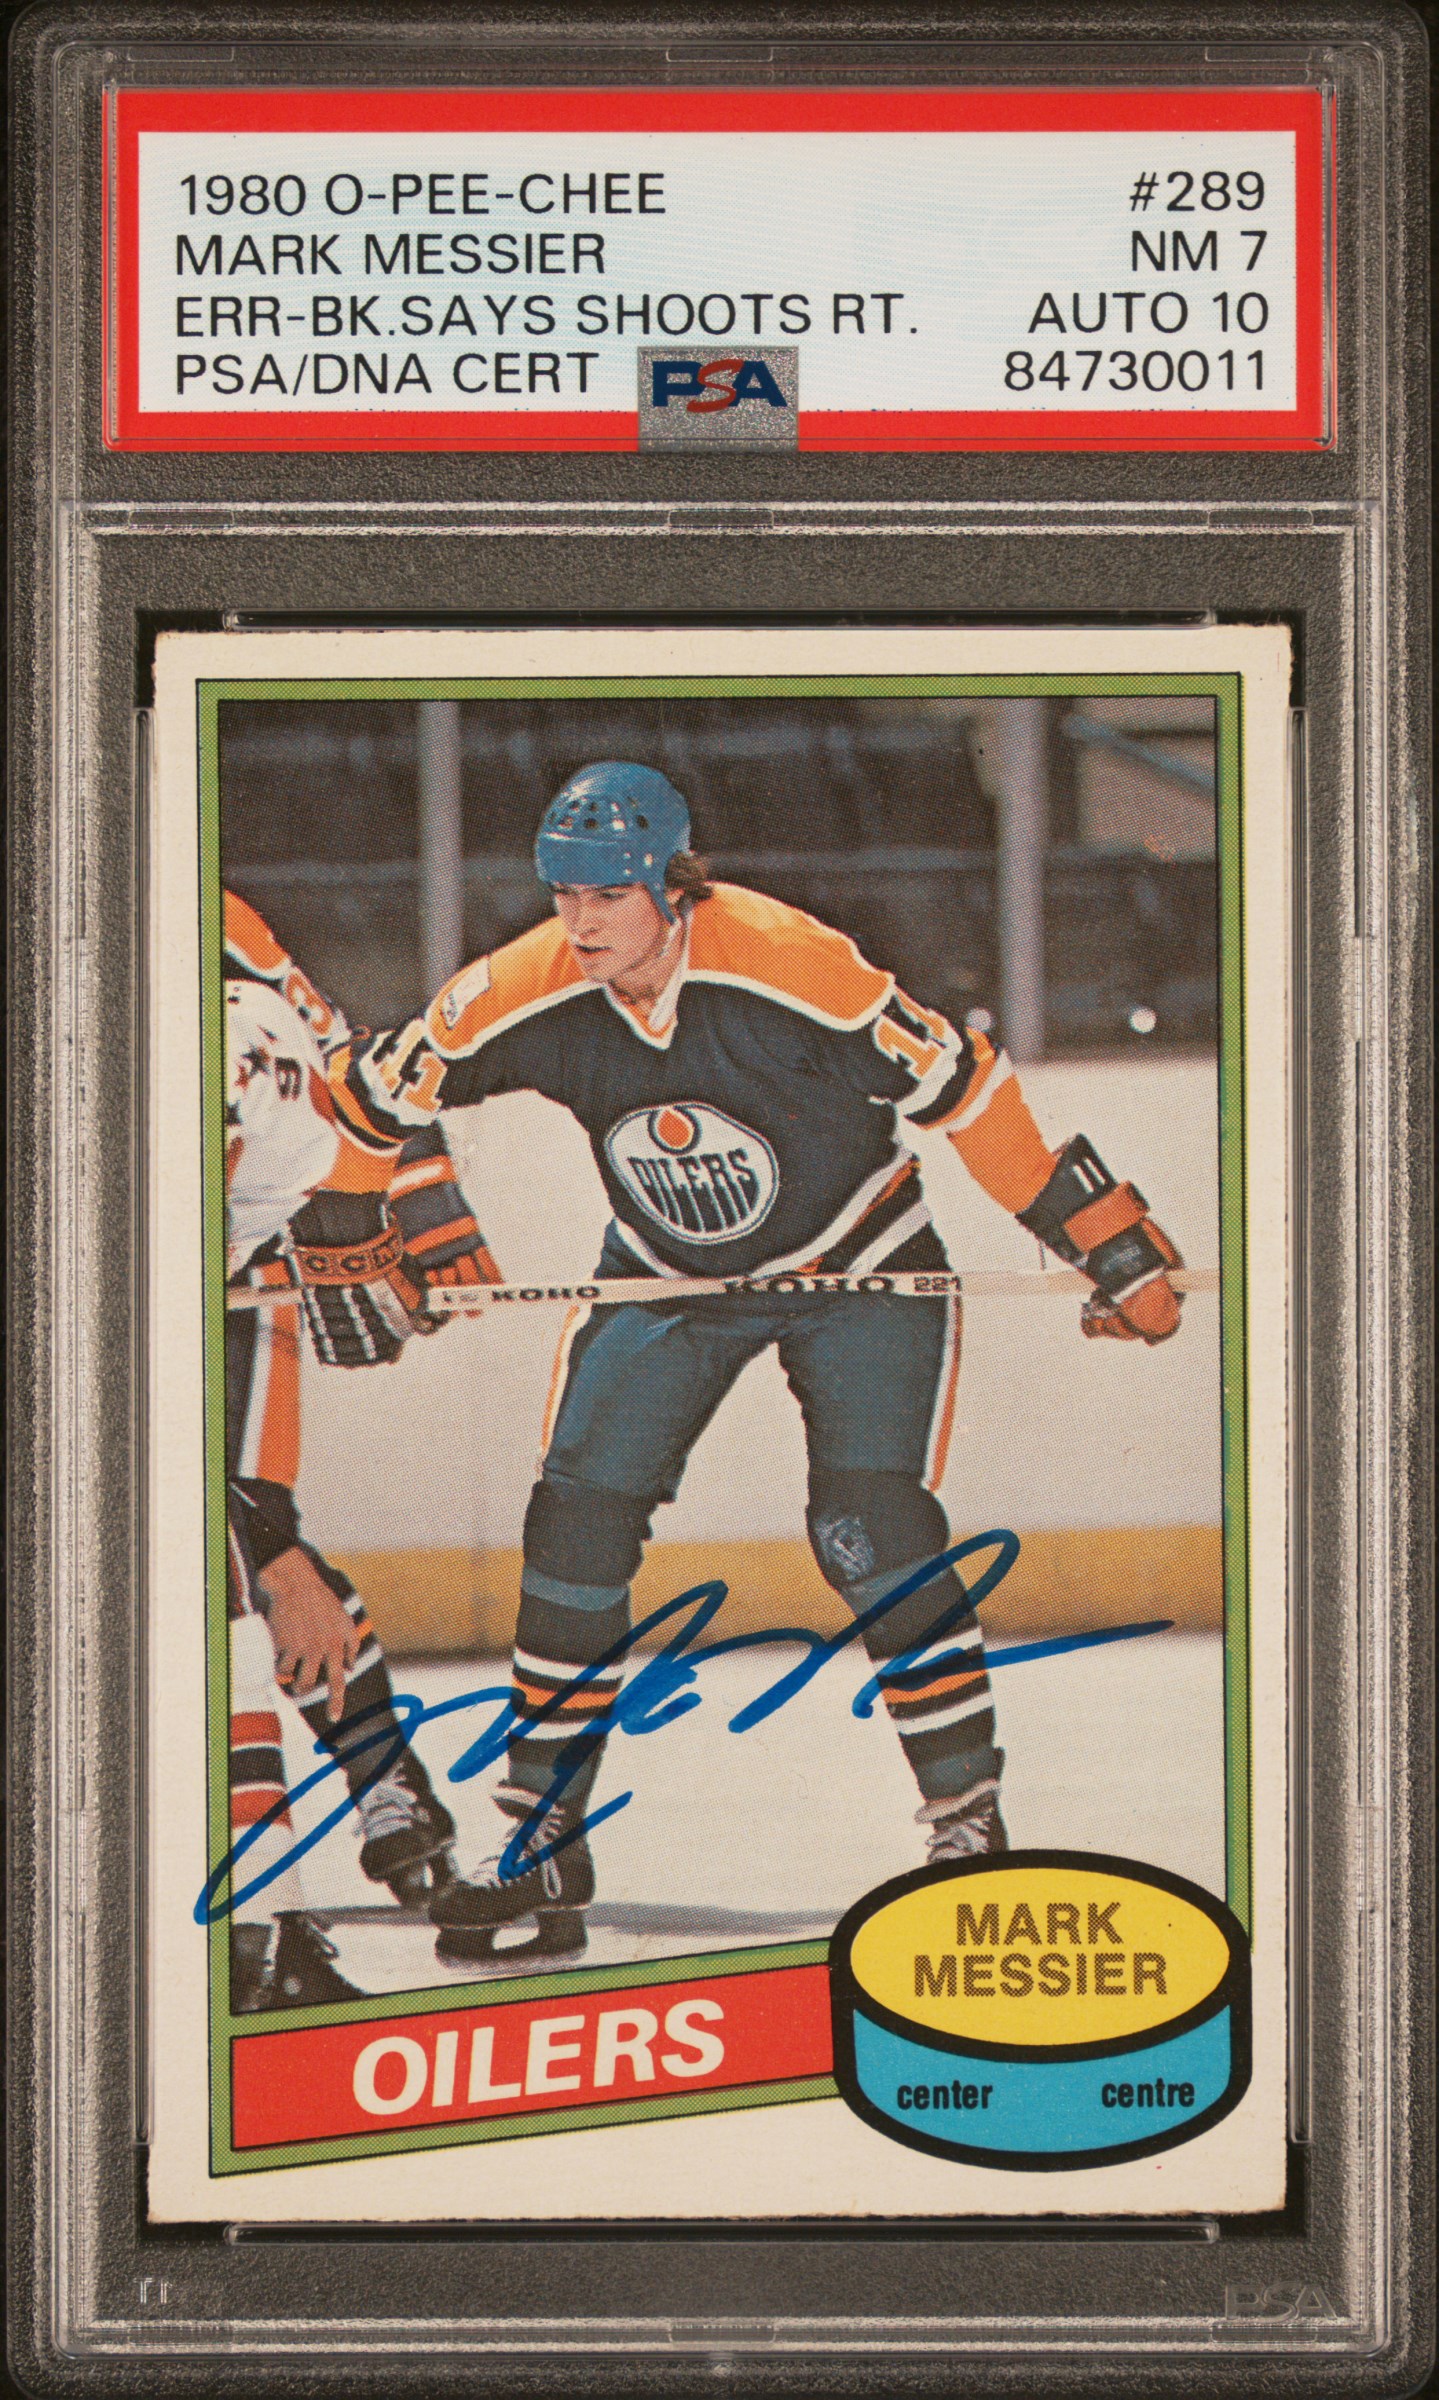 Mark Messier 1980 O-Pee-Chee Signed Rookie Card #289 Auto Graded PSA 10 84730011